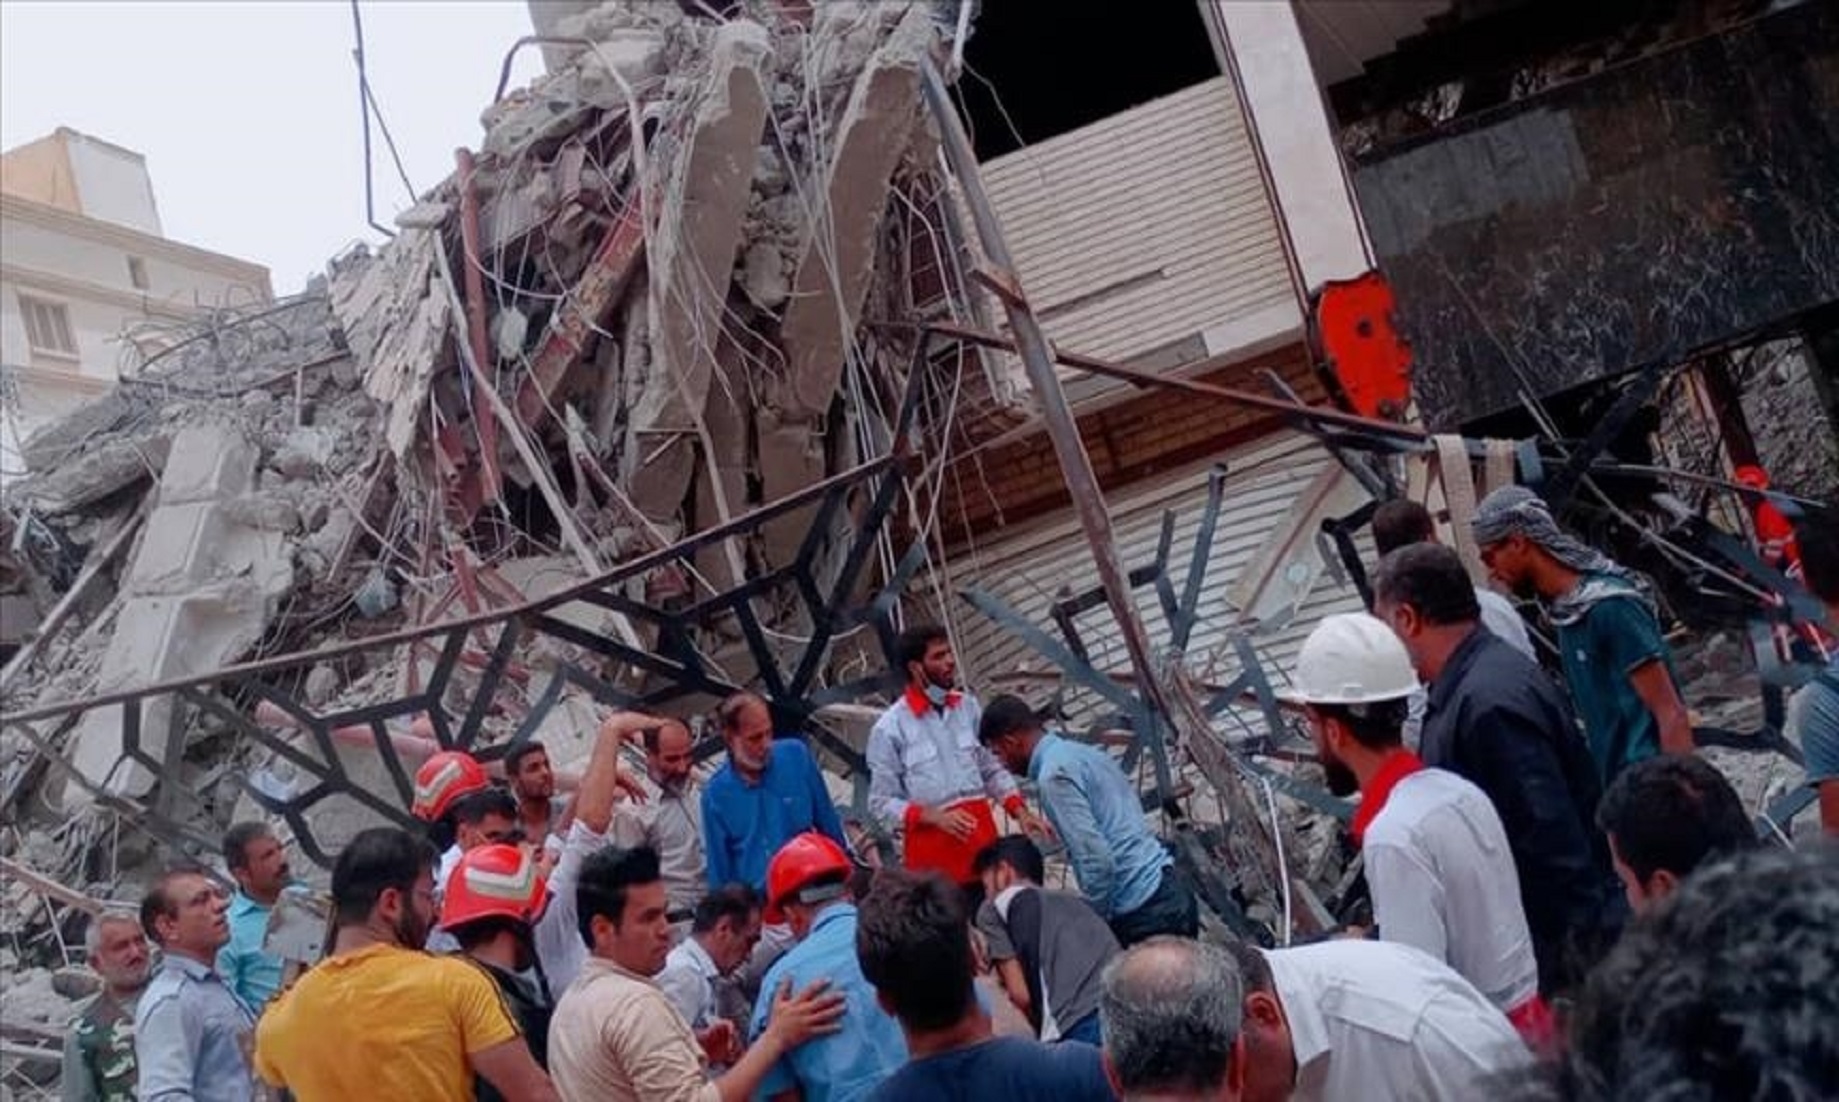 Death Toll Rises To 16 In Building Collapse In SW Iran